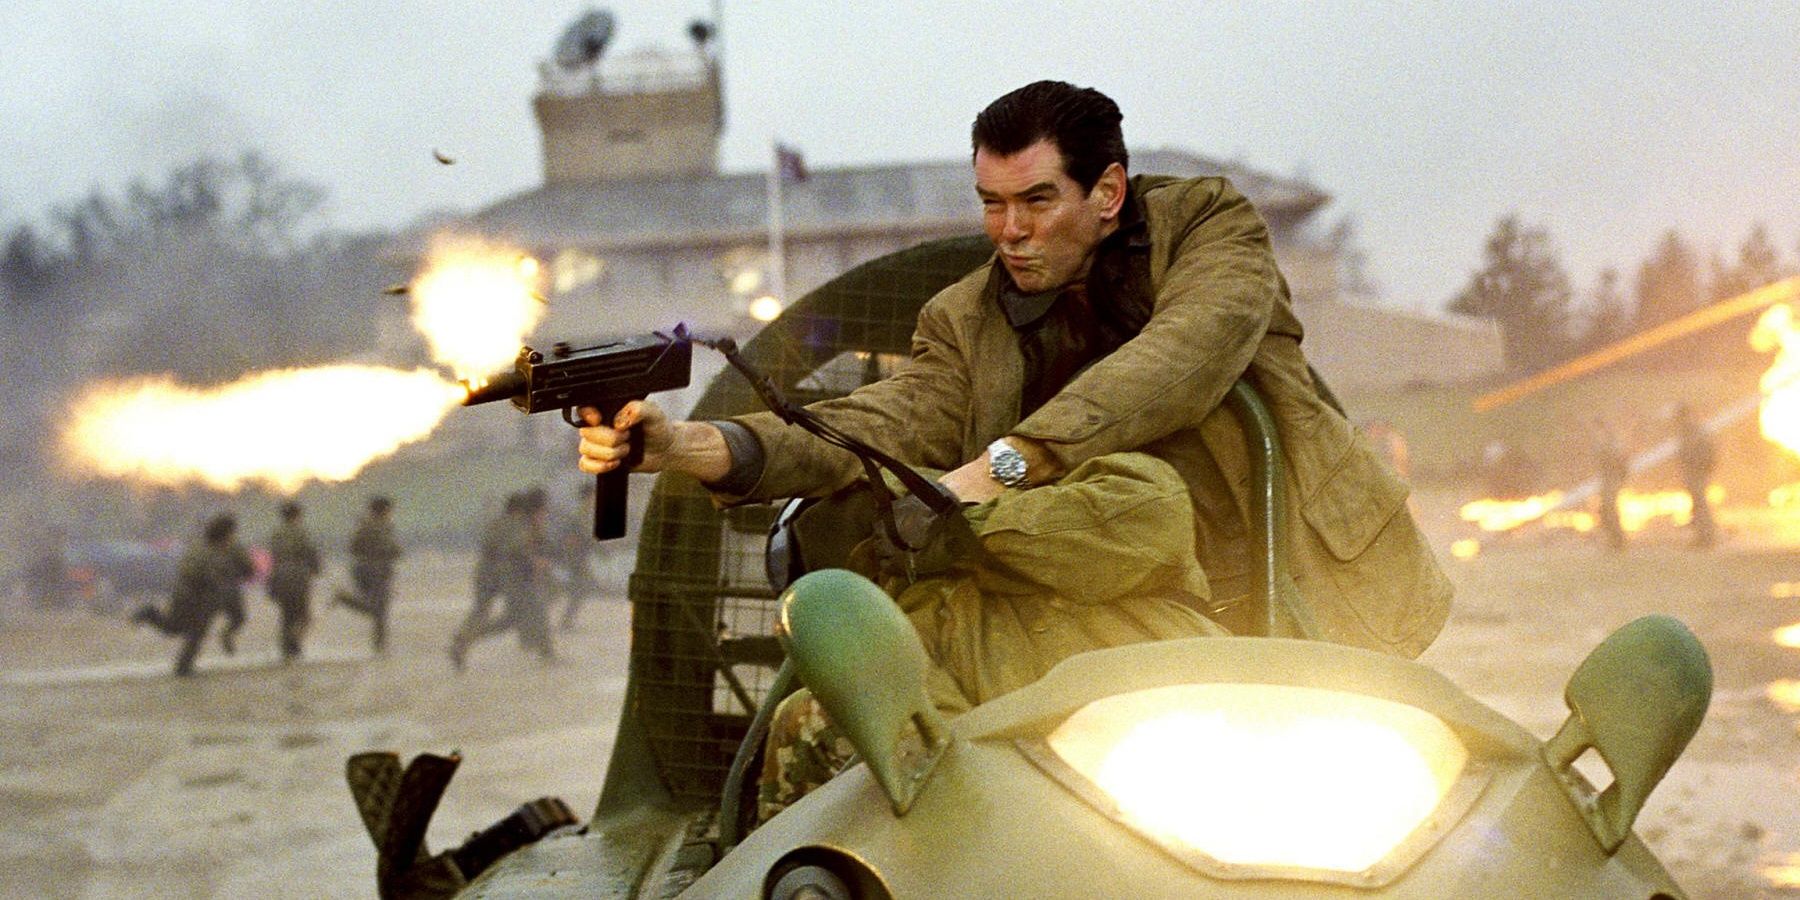 James Bond abaord a vehicle firing a gun in Die Another Day